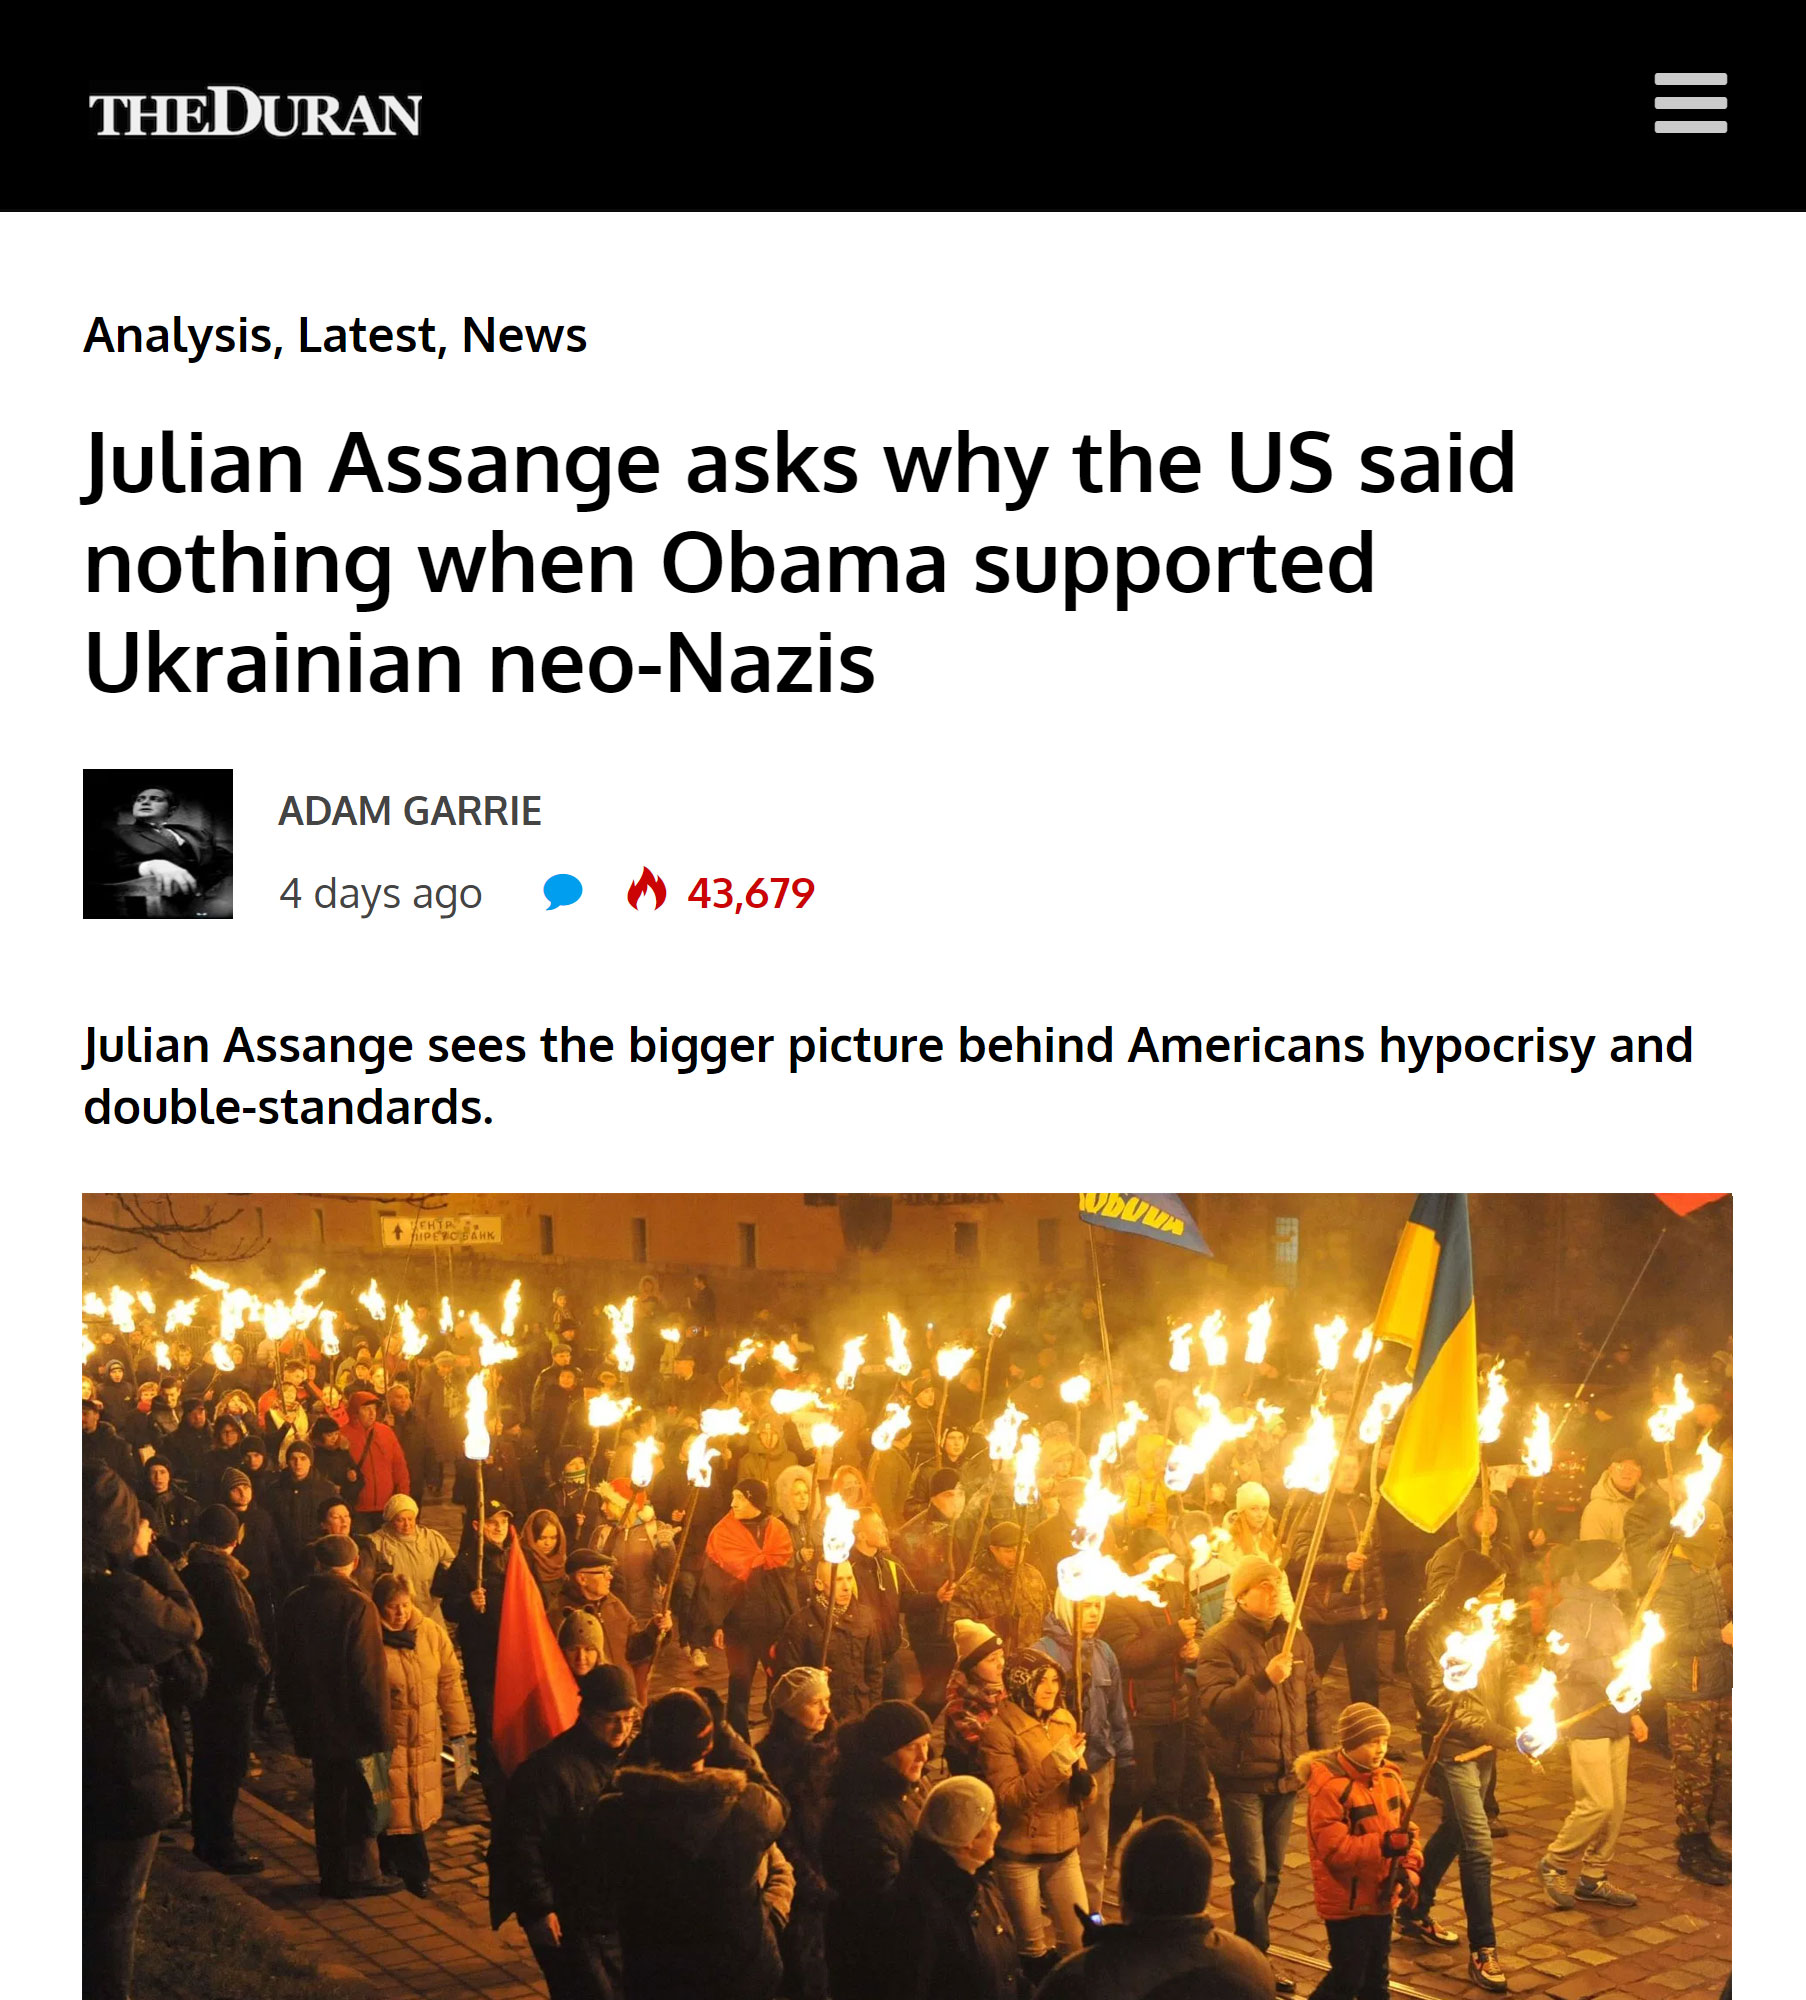 16-Julian-Assange-asks-why-the-US-said-nothing-when-Obama-supported-Ukrainian-neo-nazis.jpg